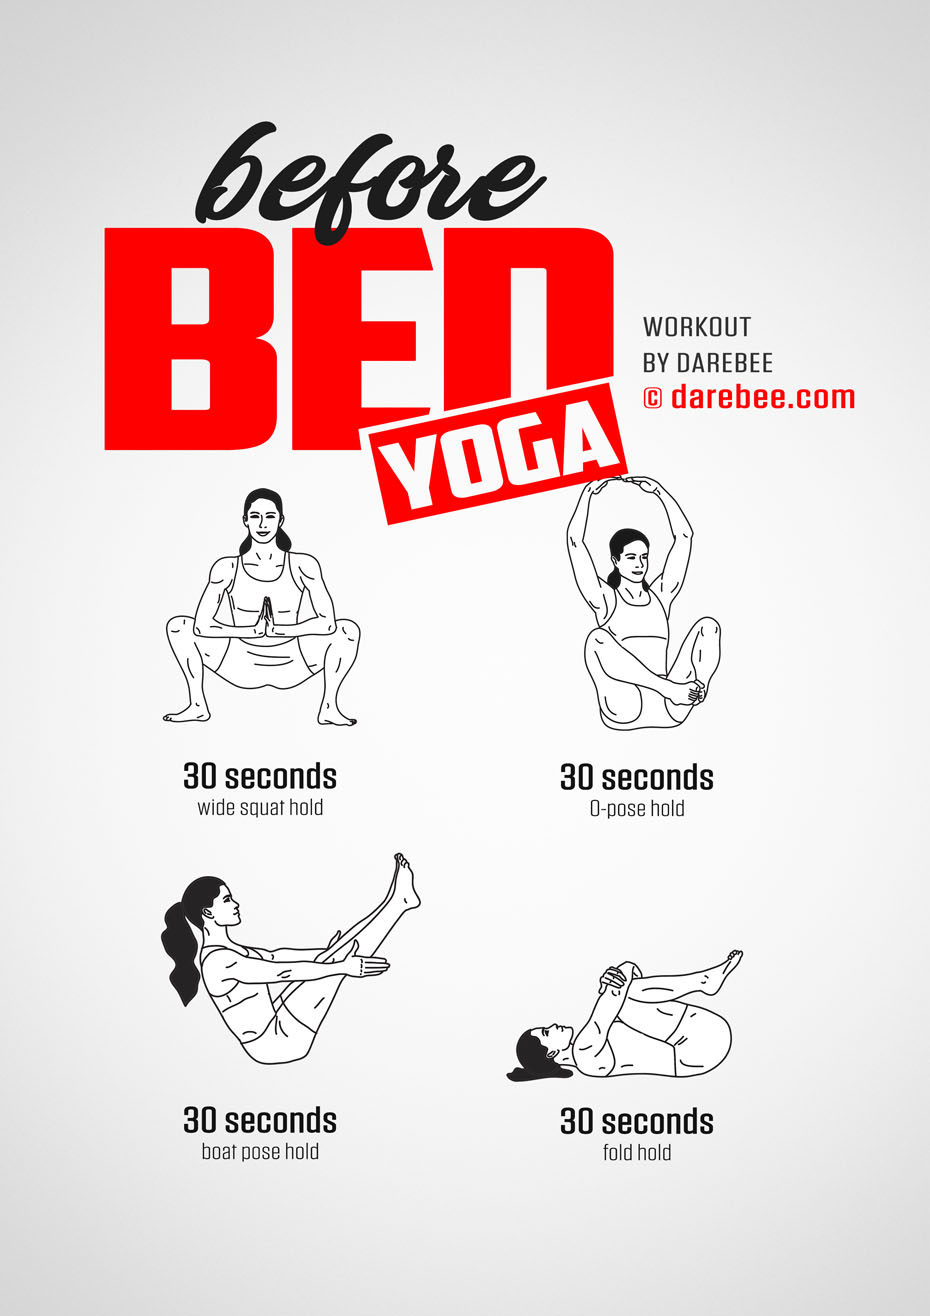 Before Bed Yoga Workout